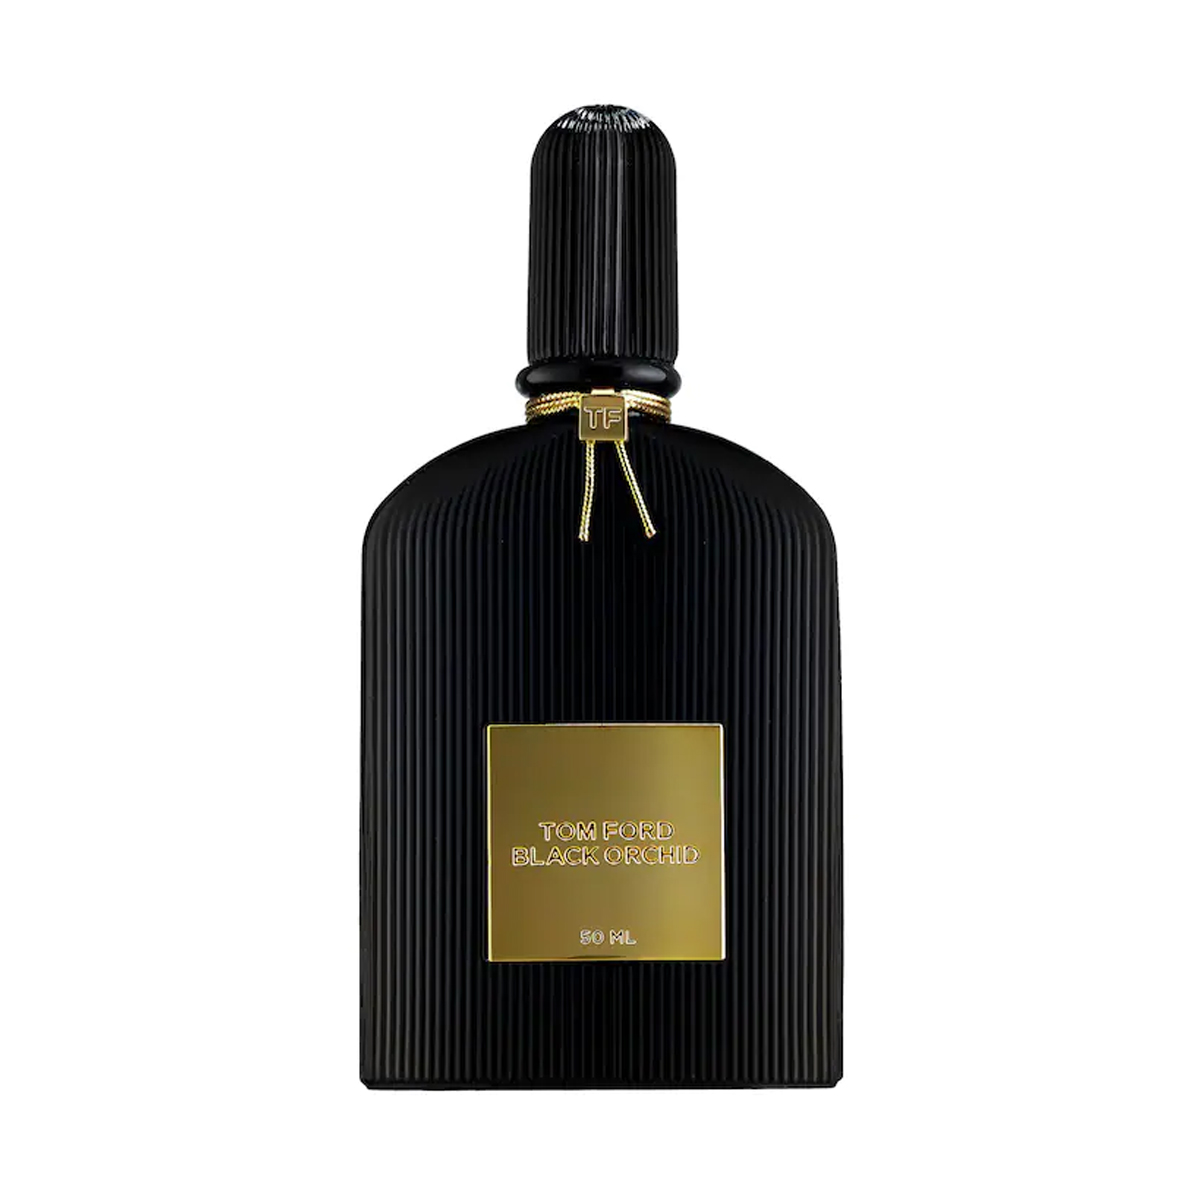 21 Expensive-Smelling Perfumes That Are So Sophisticated | Who What Wear